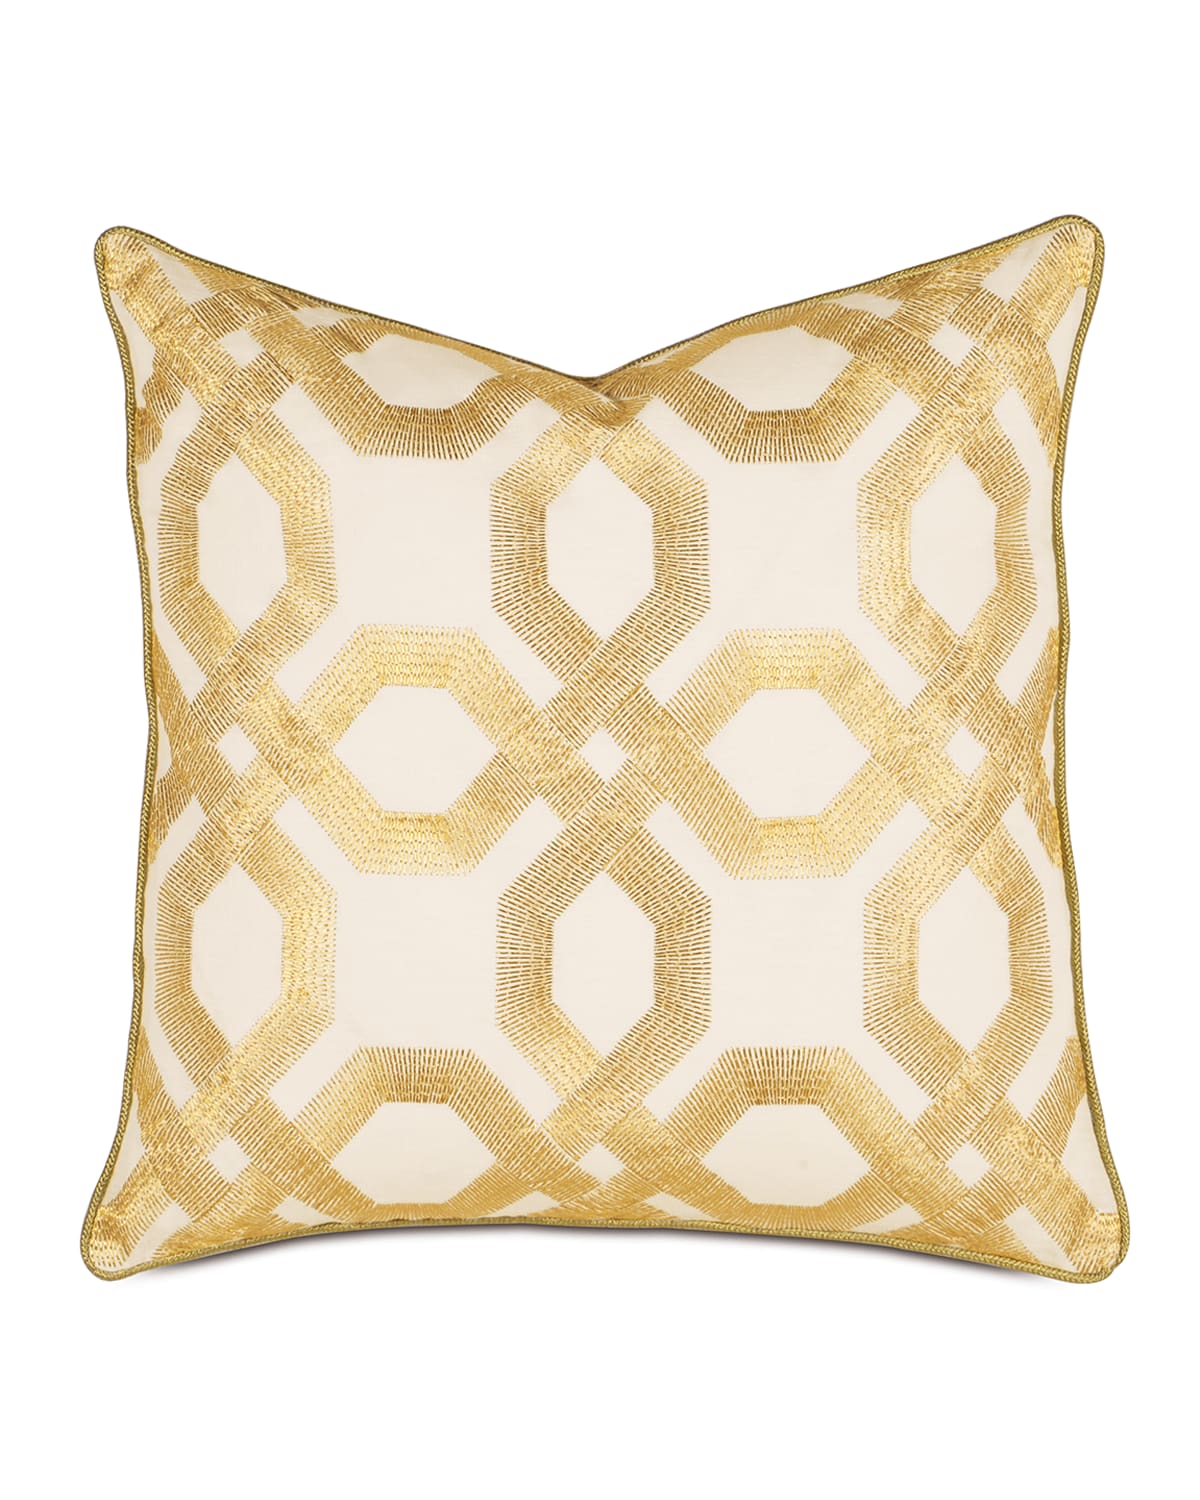 Eastern Accents Luxe Square Decorative Pillow In Gold